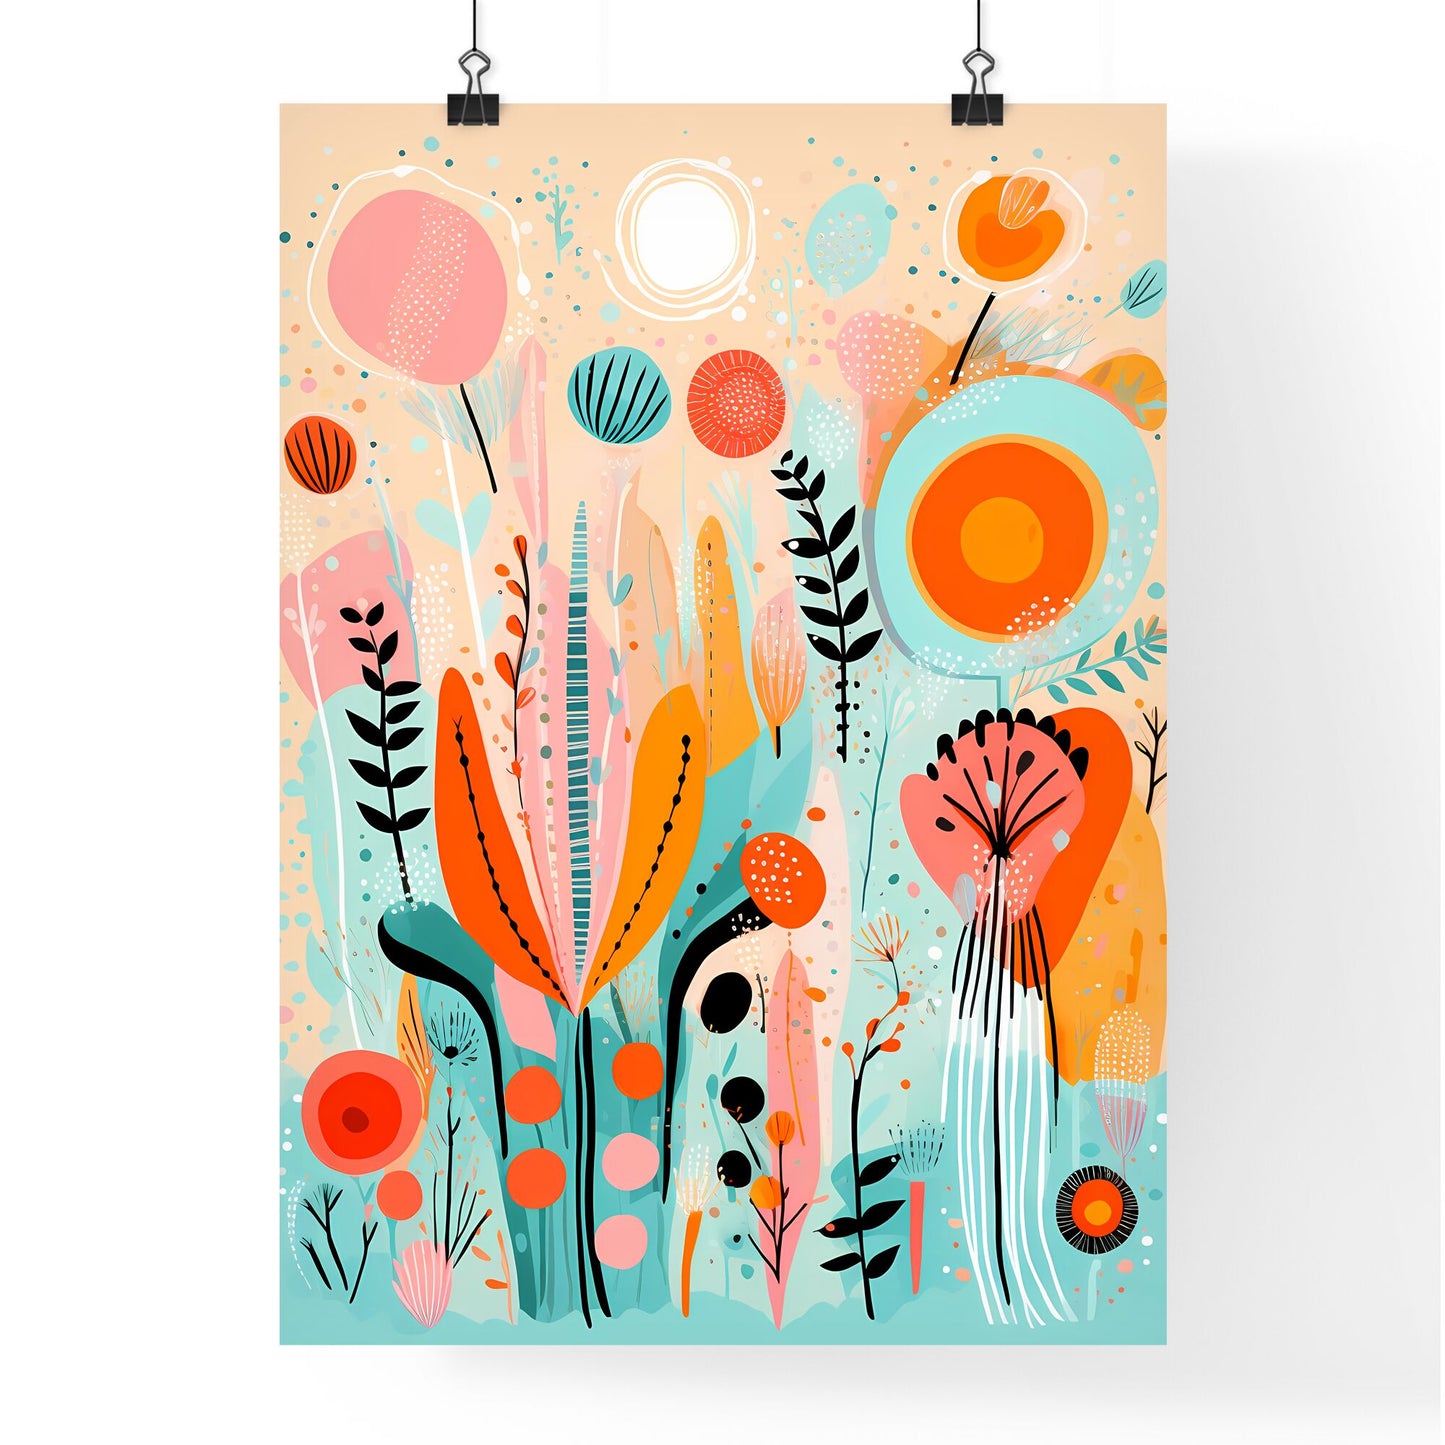 Colorful Art Of Flowers And Plants Art Print Default Title